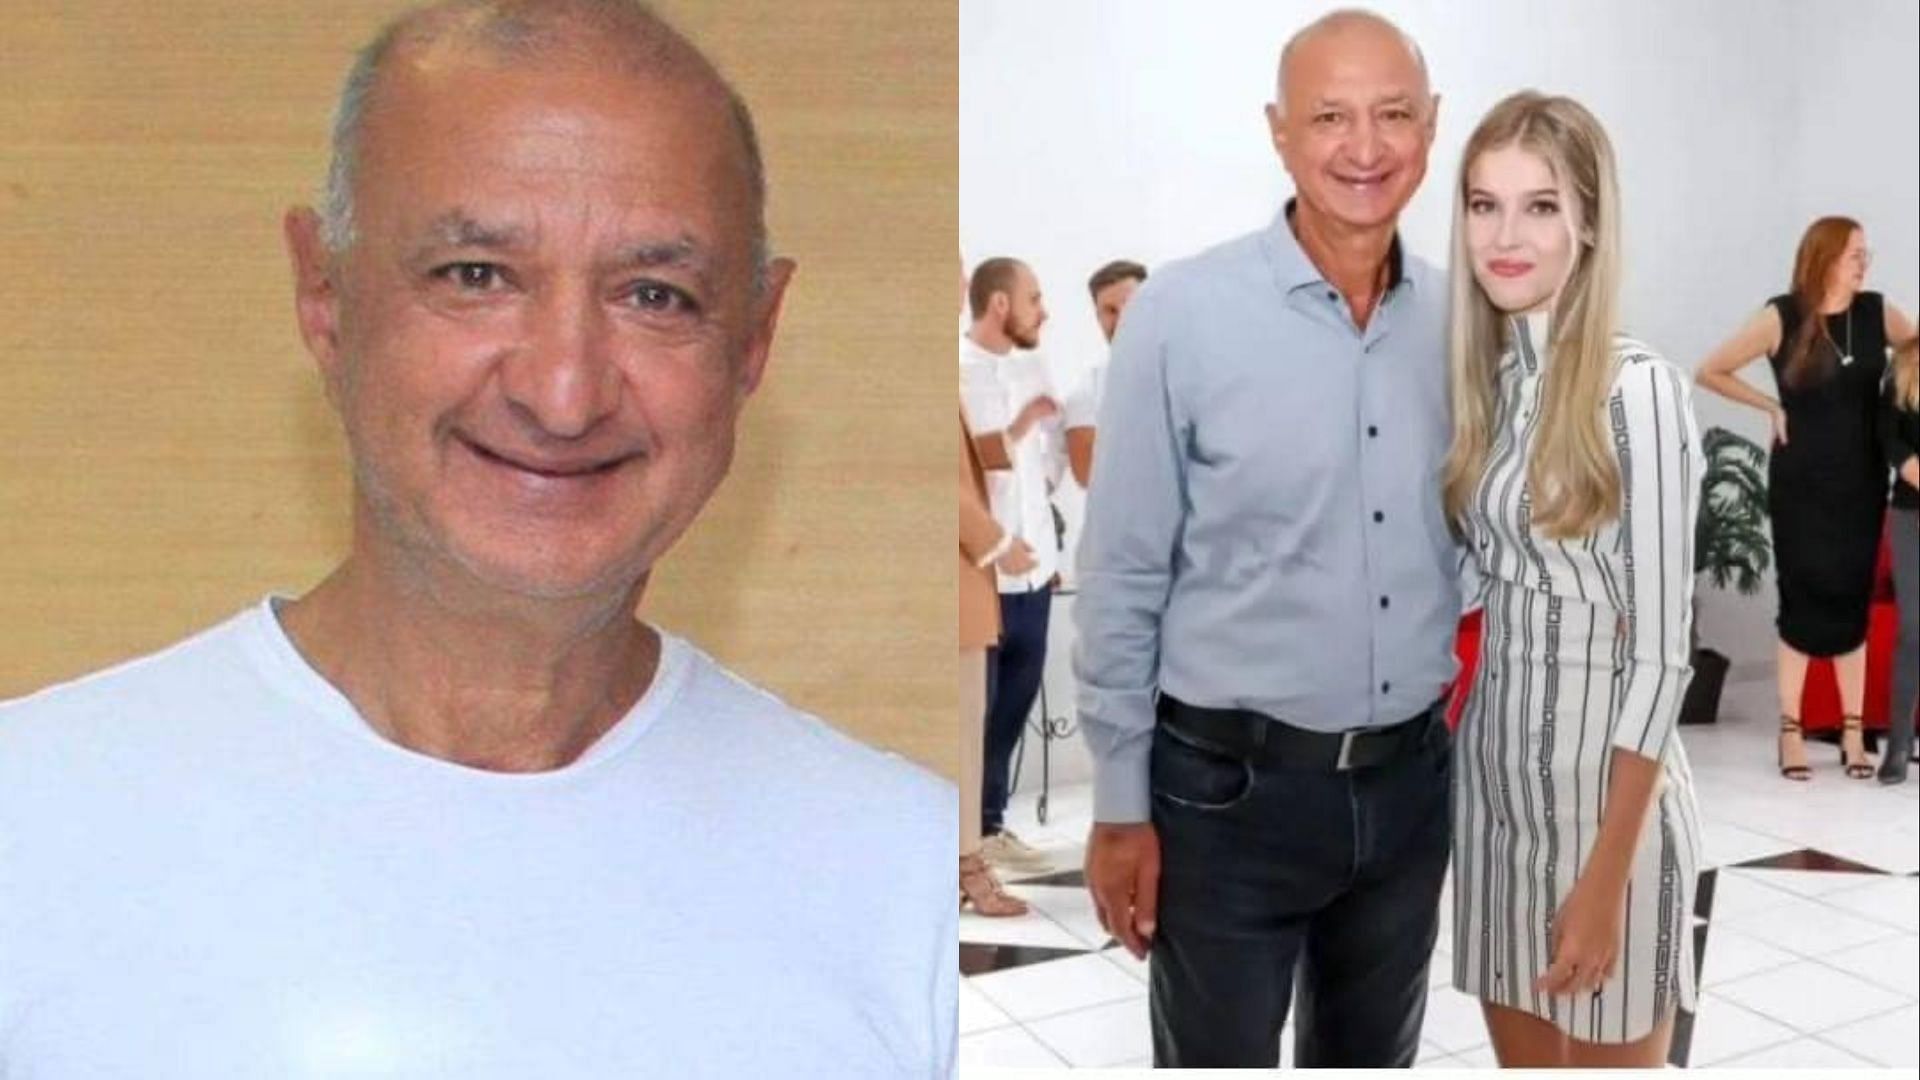 Brazilian mayor Hissam Hussein comes under fire after marrying a 16-year-old girl. (Image via AEN, Facebook/Ponte FM Indaial 98,3)